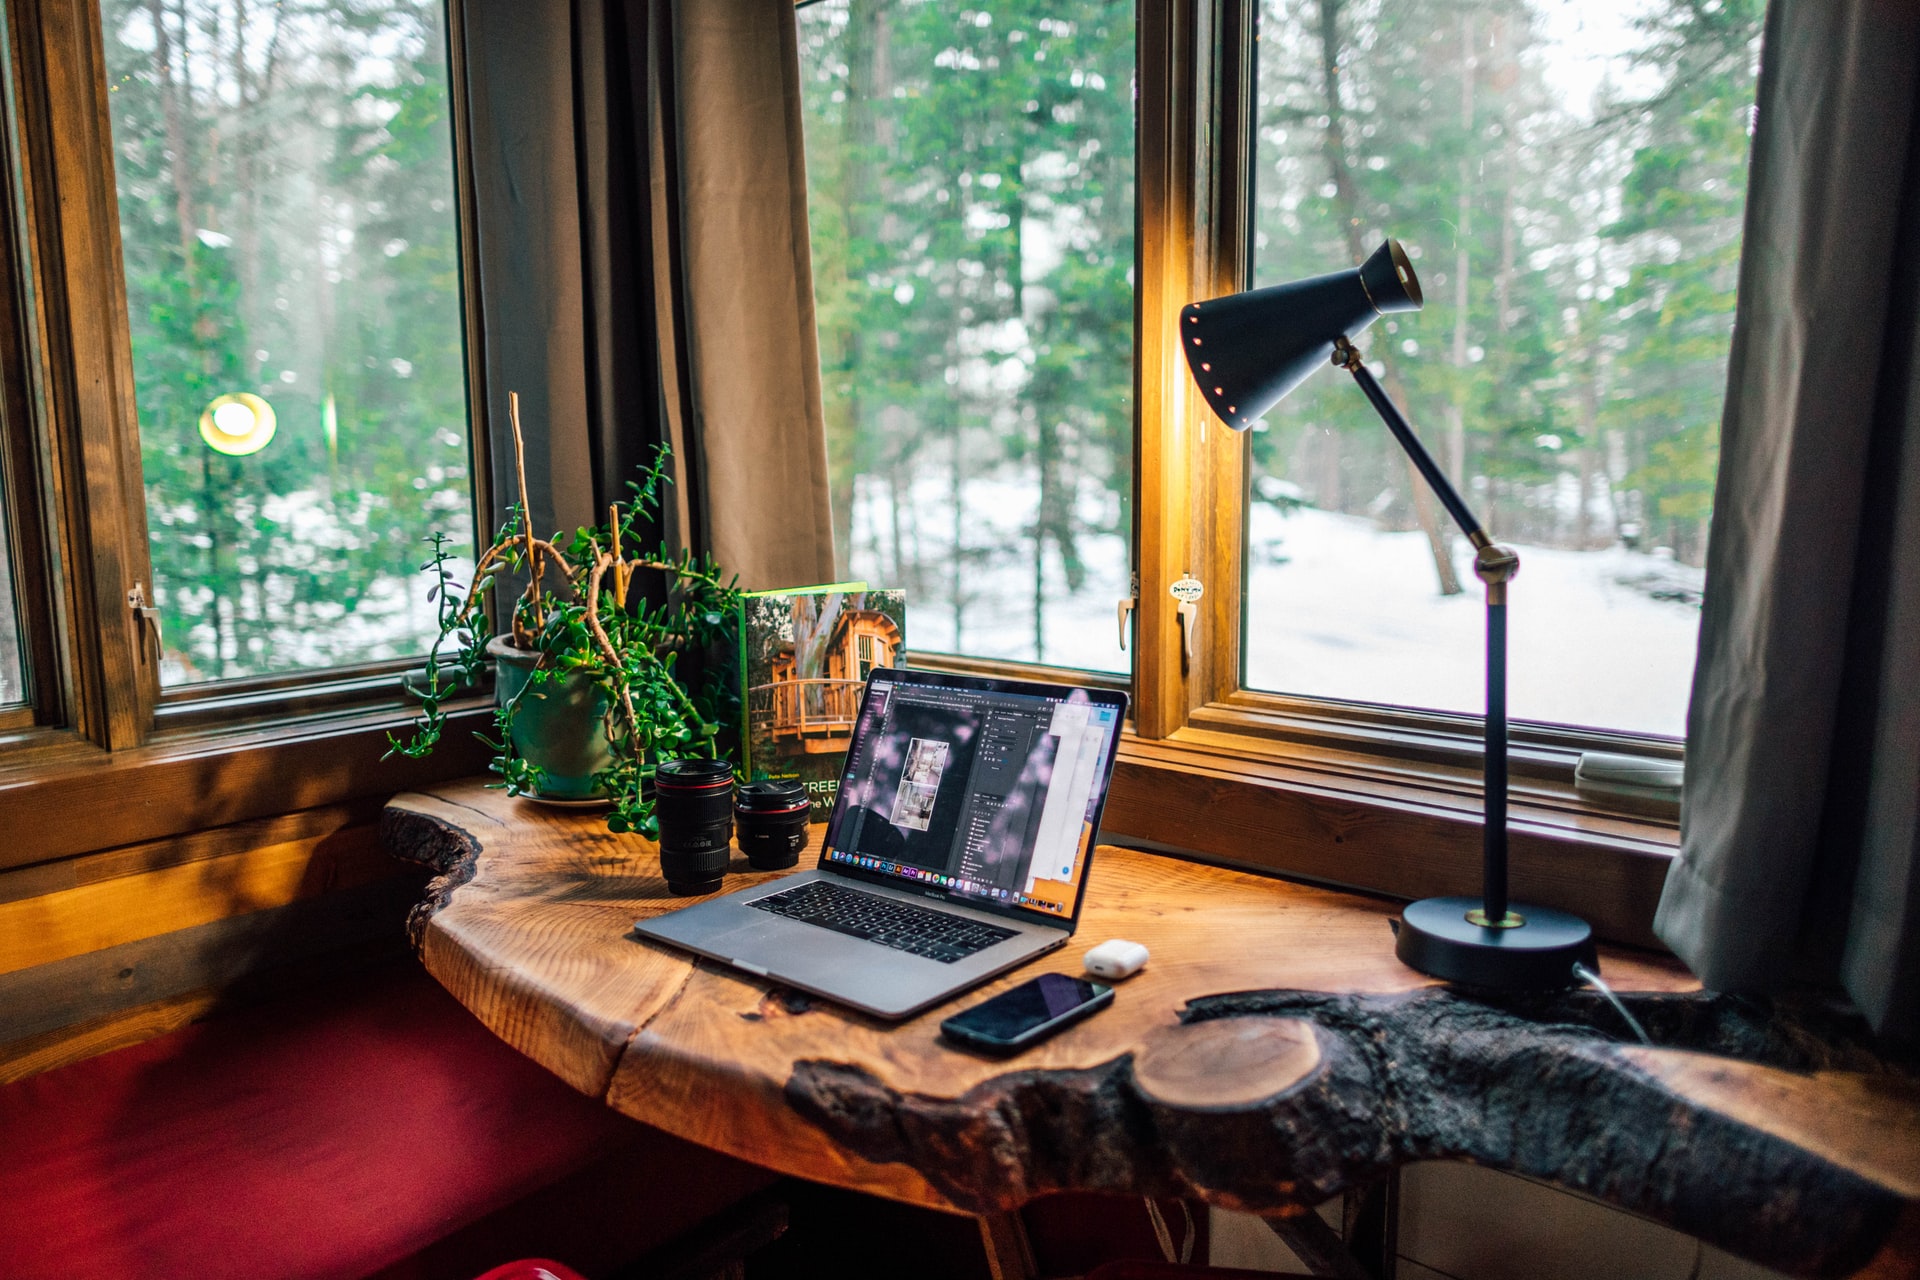 Remote Work: How to Address It Effectively in Job Interviews